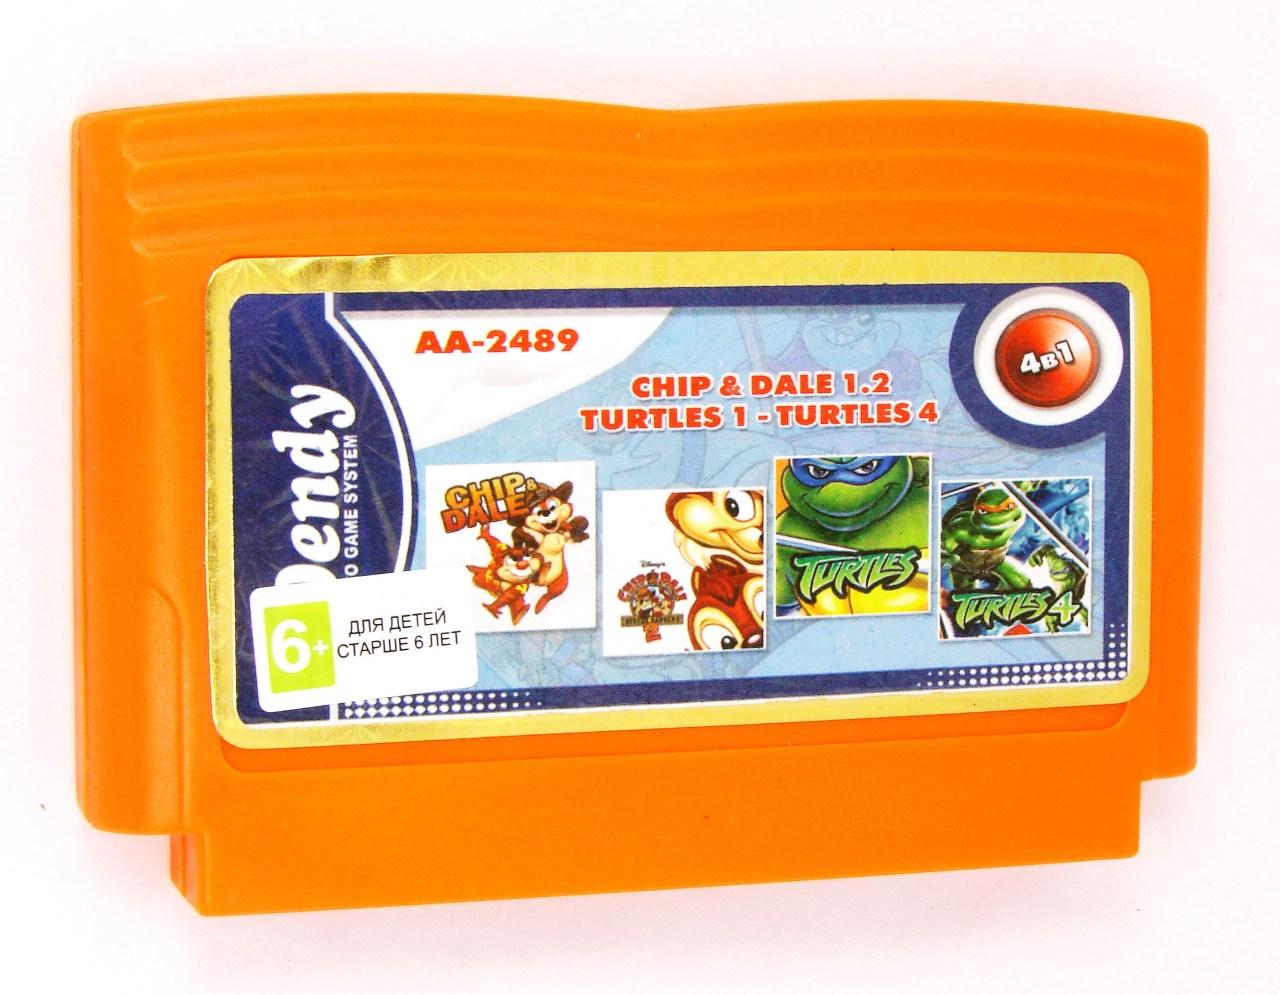    AA-2489 4 in 1 (Dendy), Chip & Dale 1, Chip & Dale 2, Turtles 1, Turtles 4